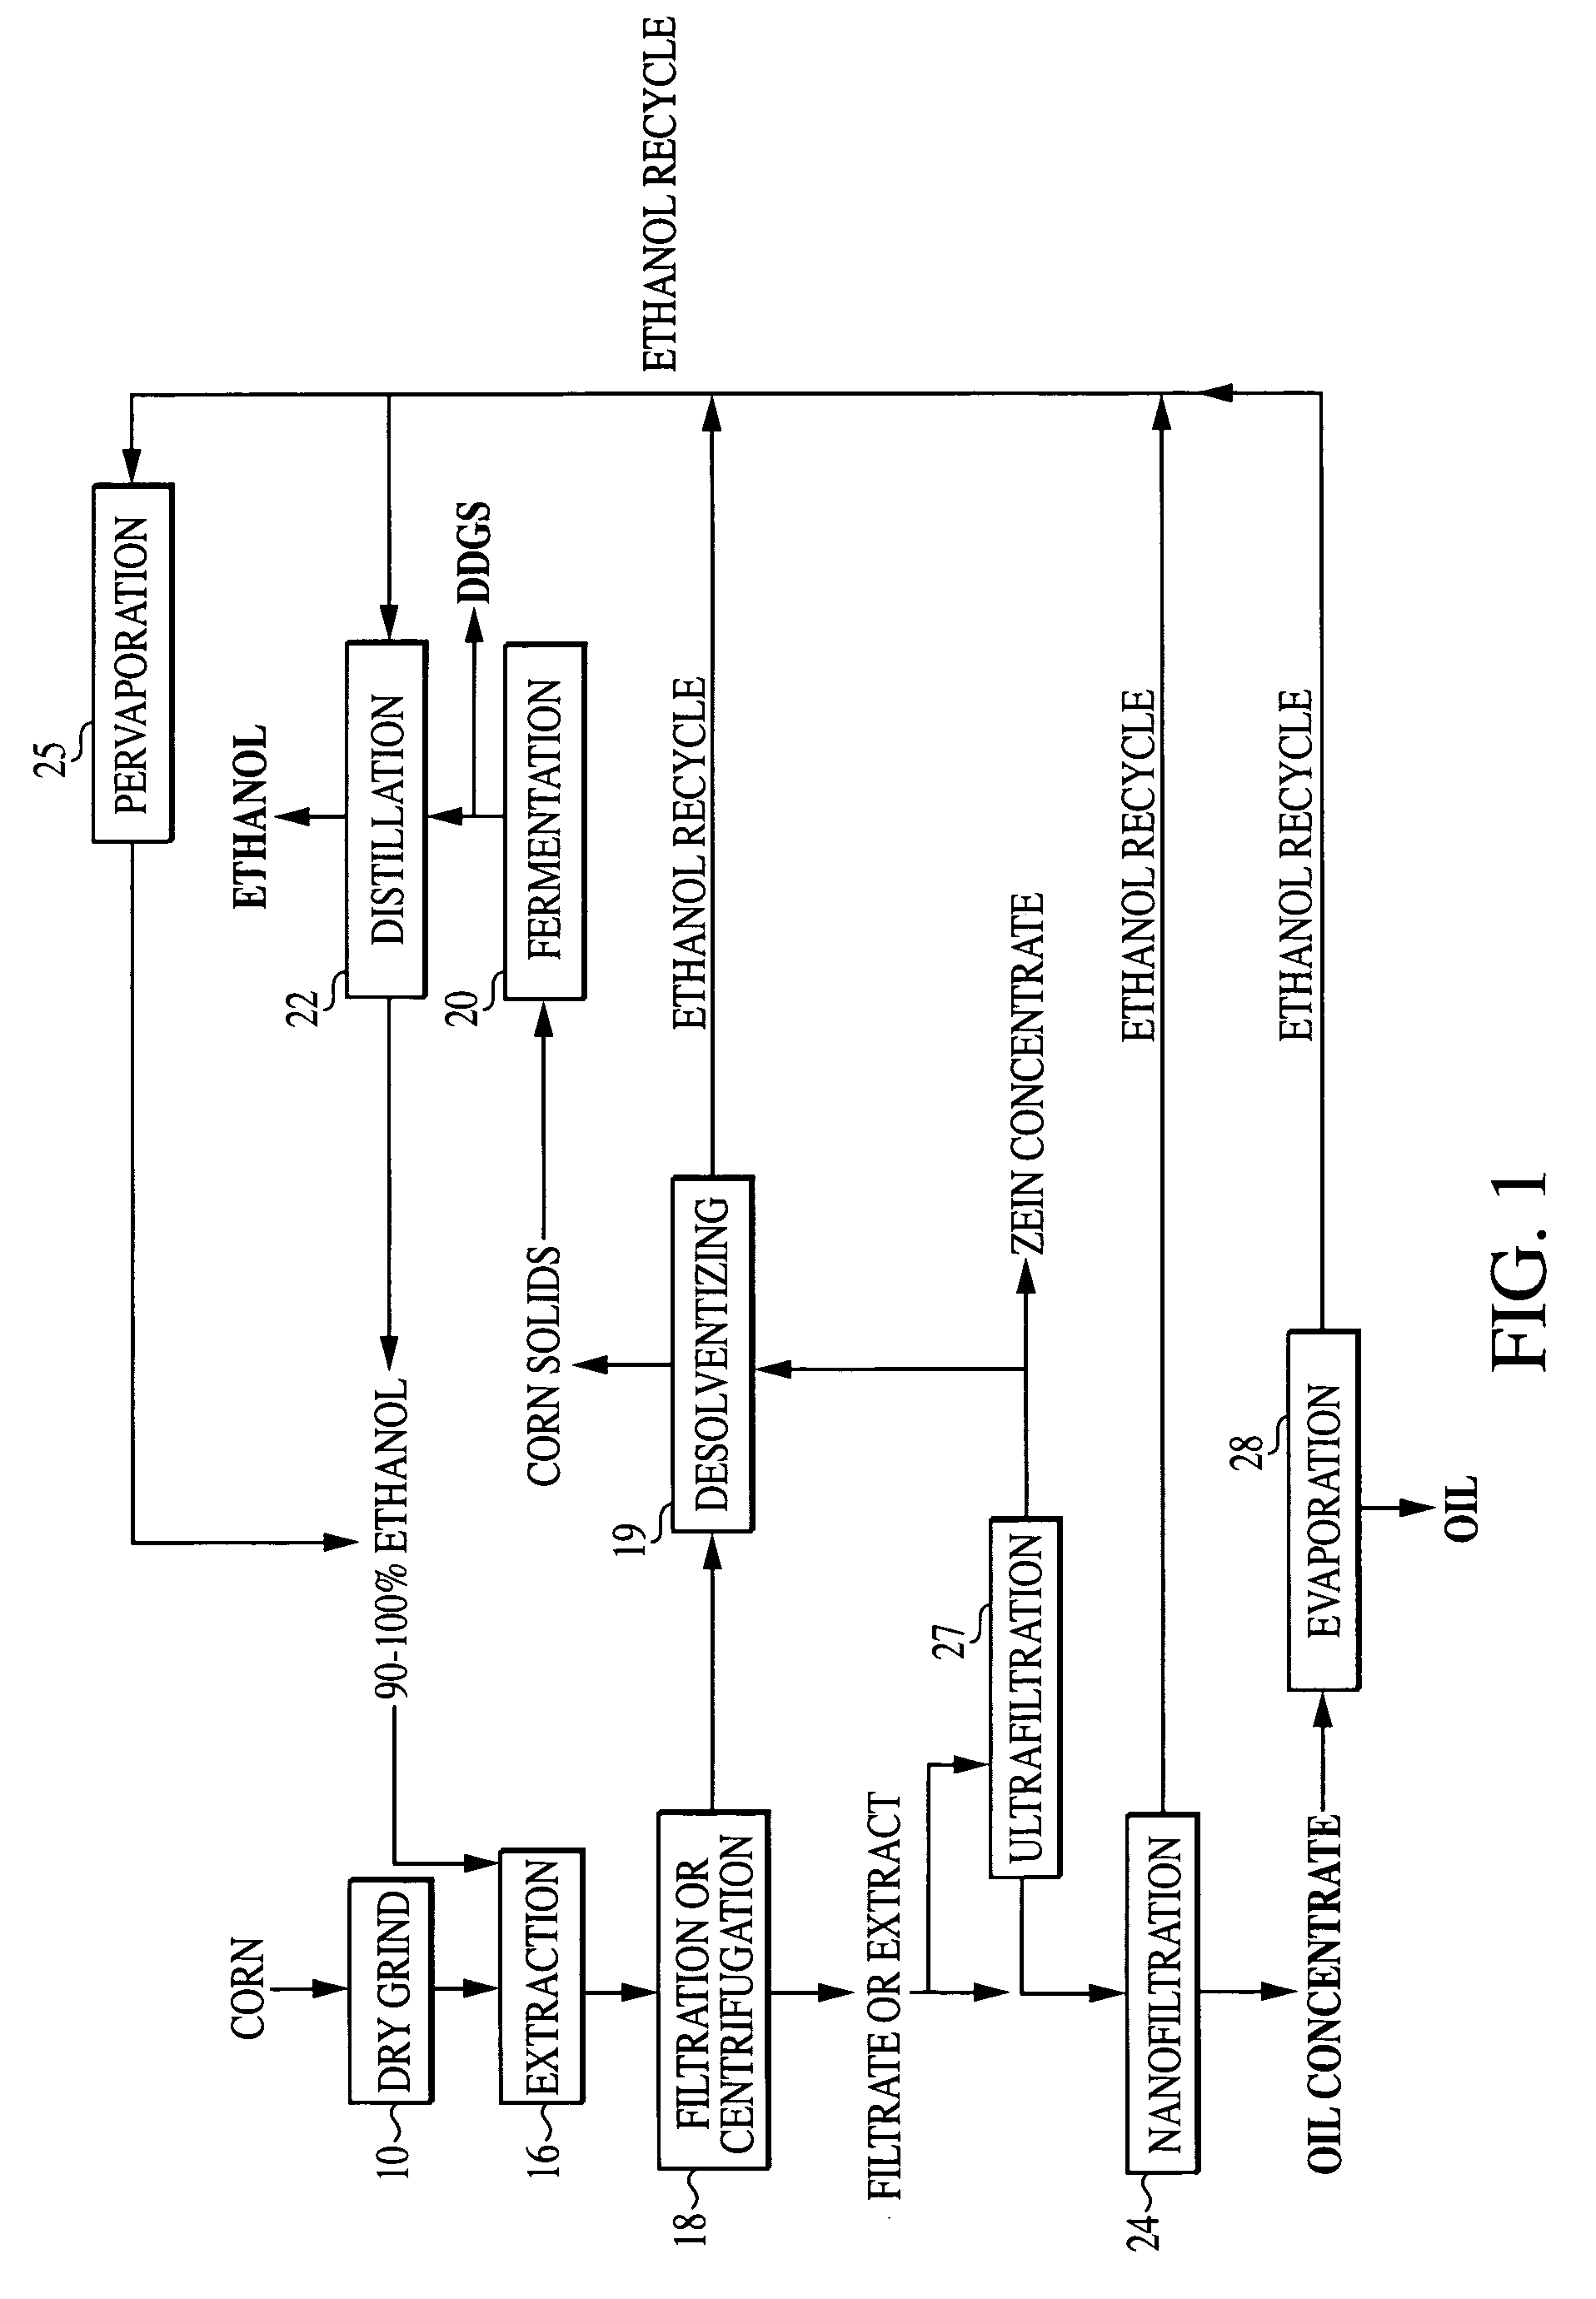 Method and system for extraction of zein and/or oil from corn